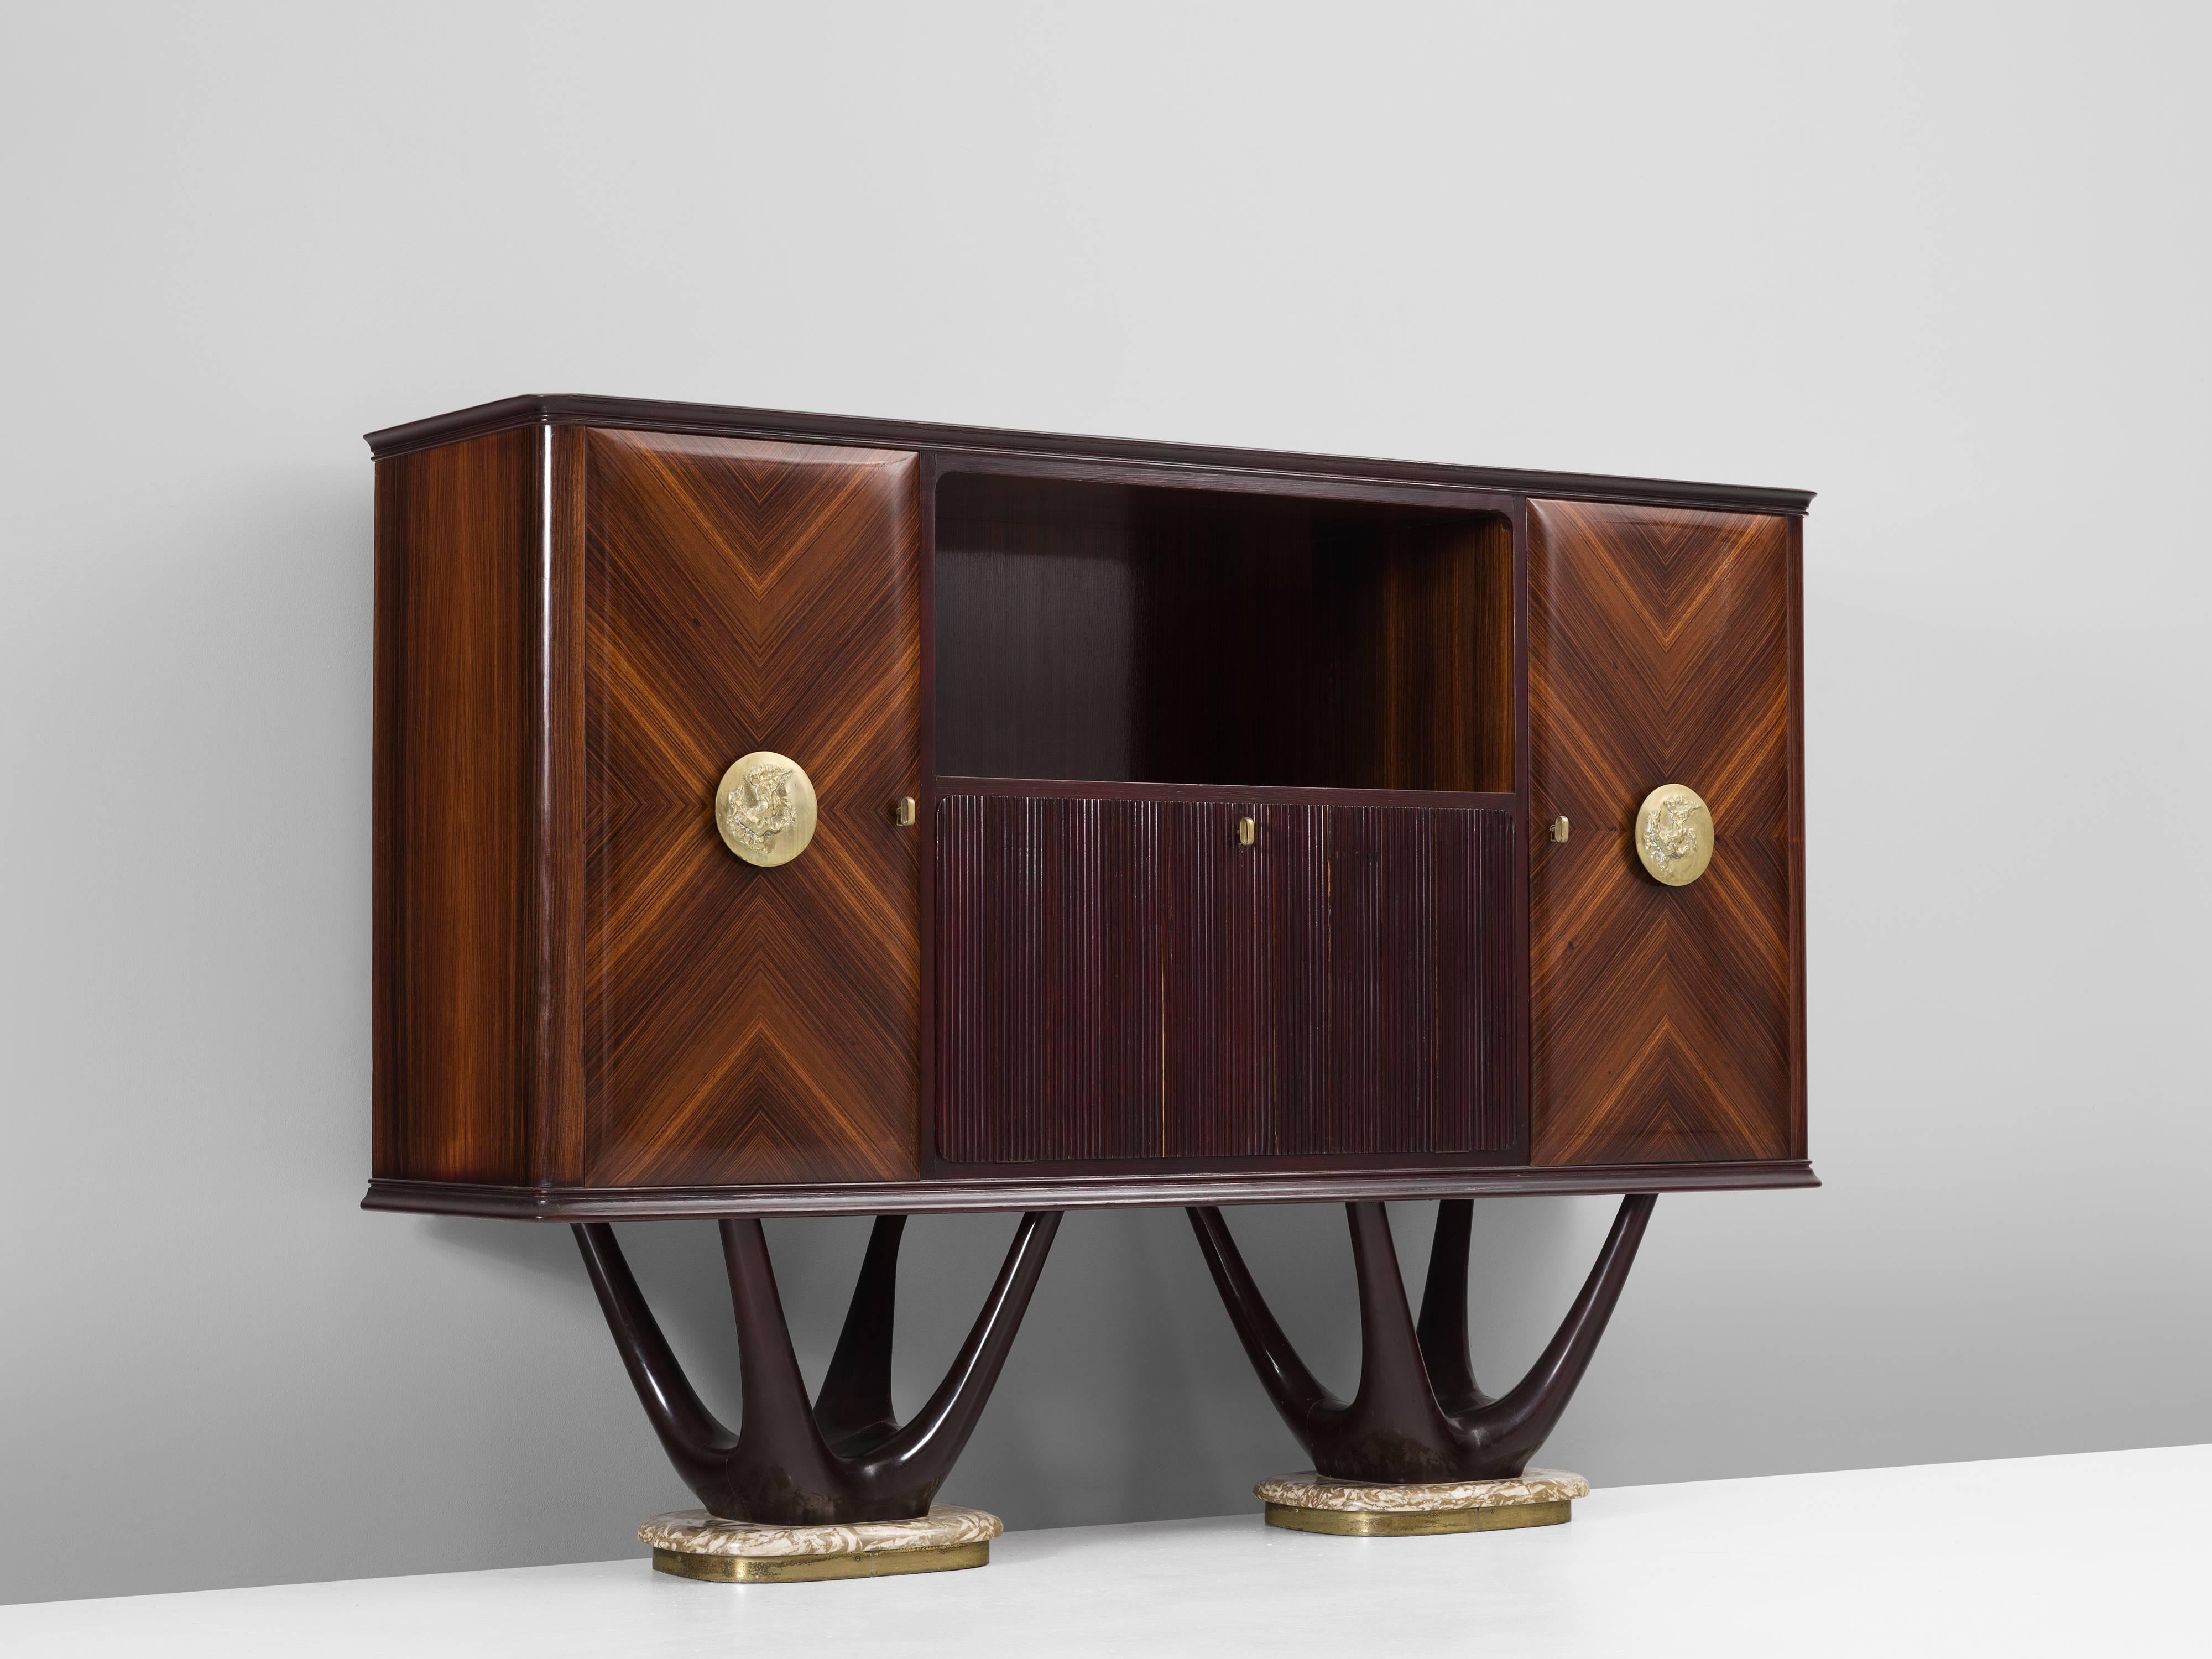 Cabinet in mahogany, maple, marble, glass and brass for Fratelli Turri, Italy 1950s.

Impressive bar in the style of Vittorio Dassi. The cabinet consist of a mahogany construction. The doors are made of rosewood veneer with a stunning graphical